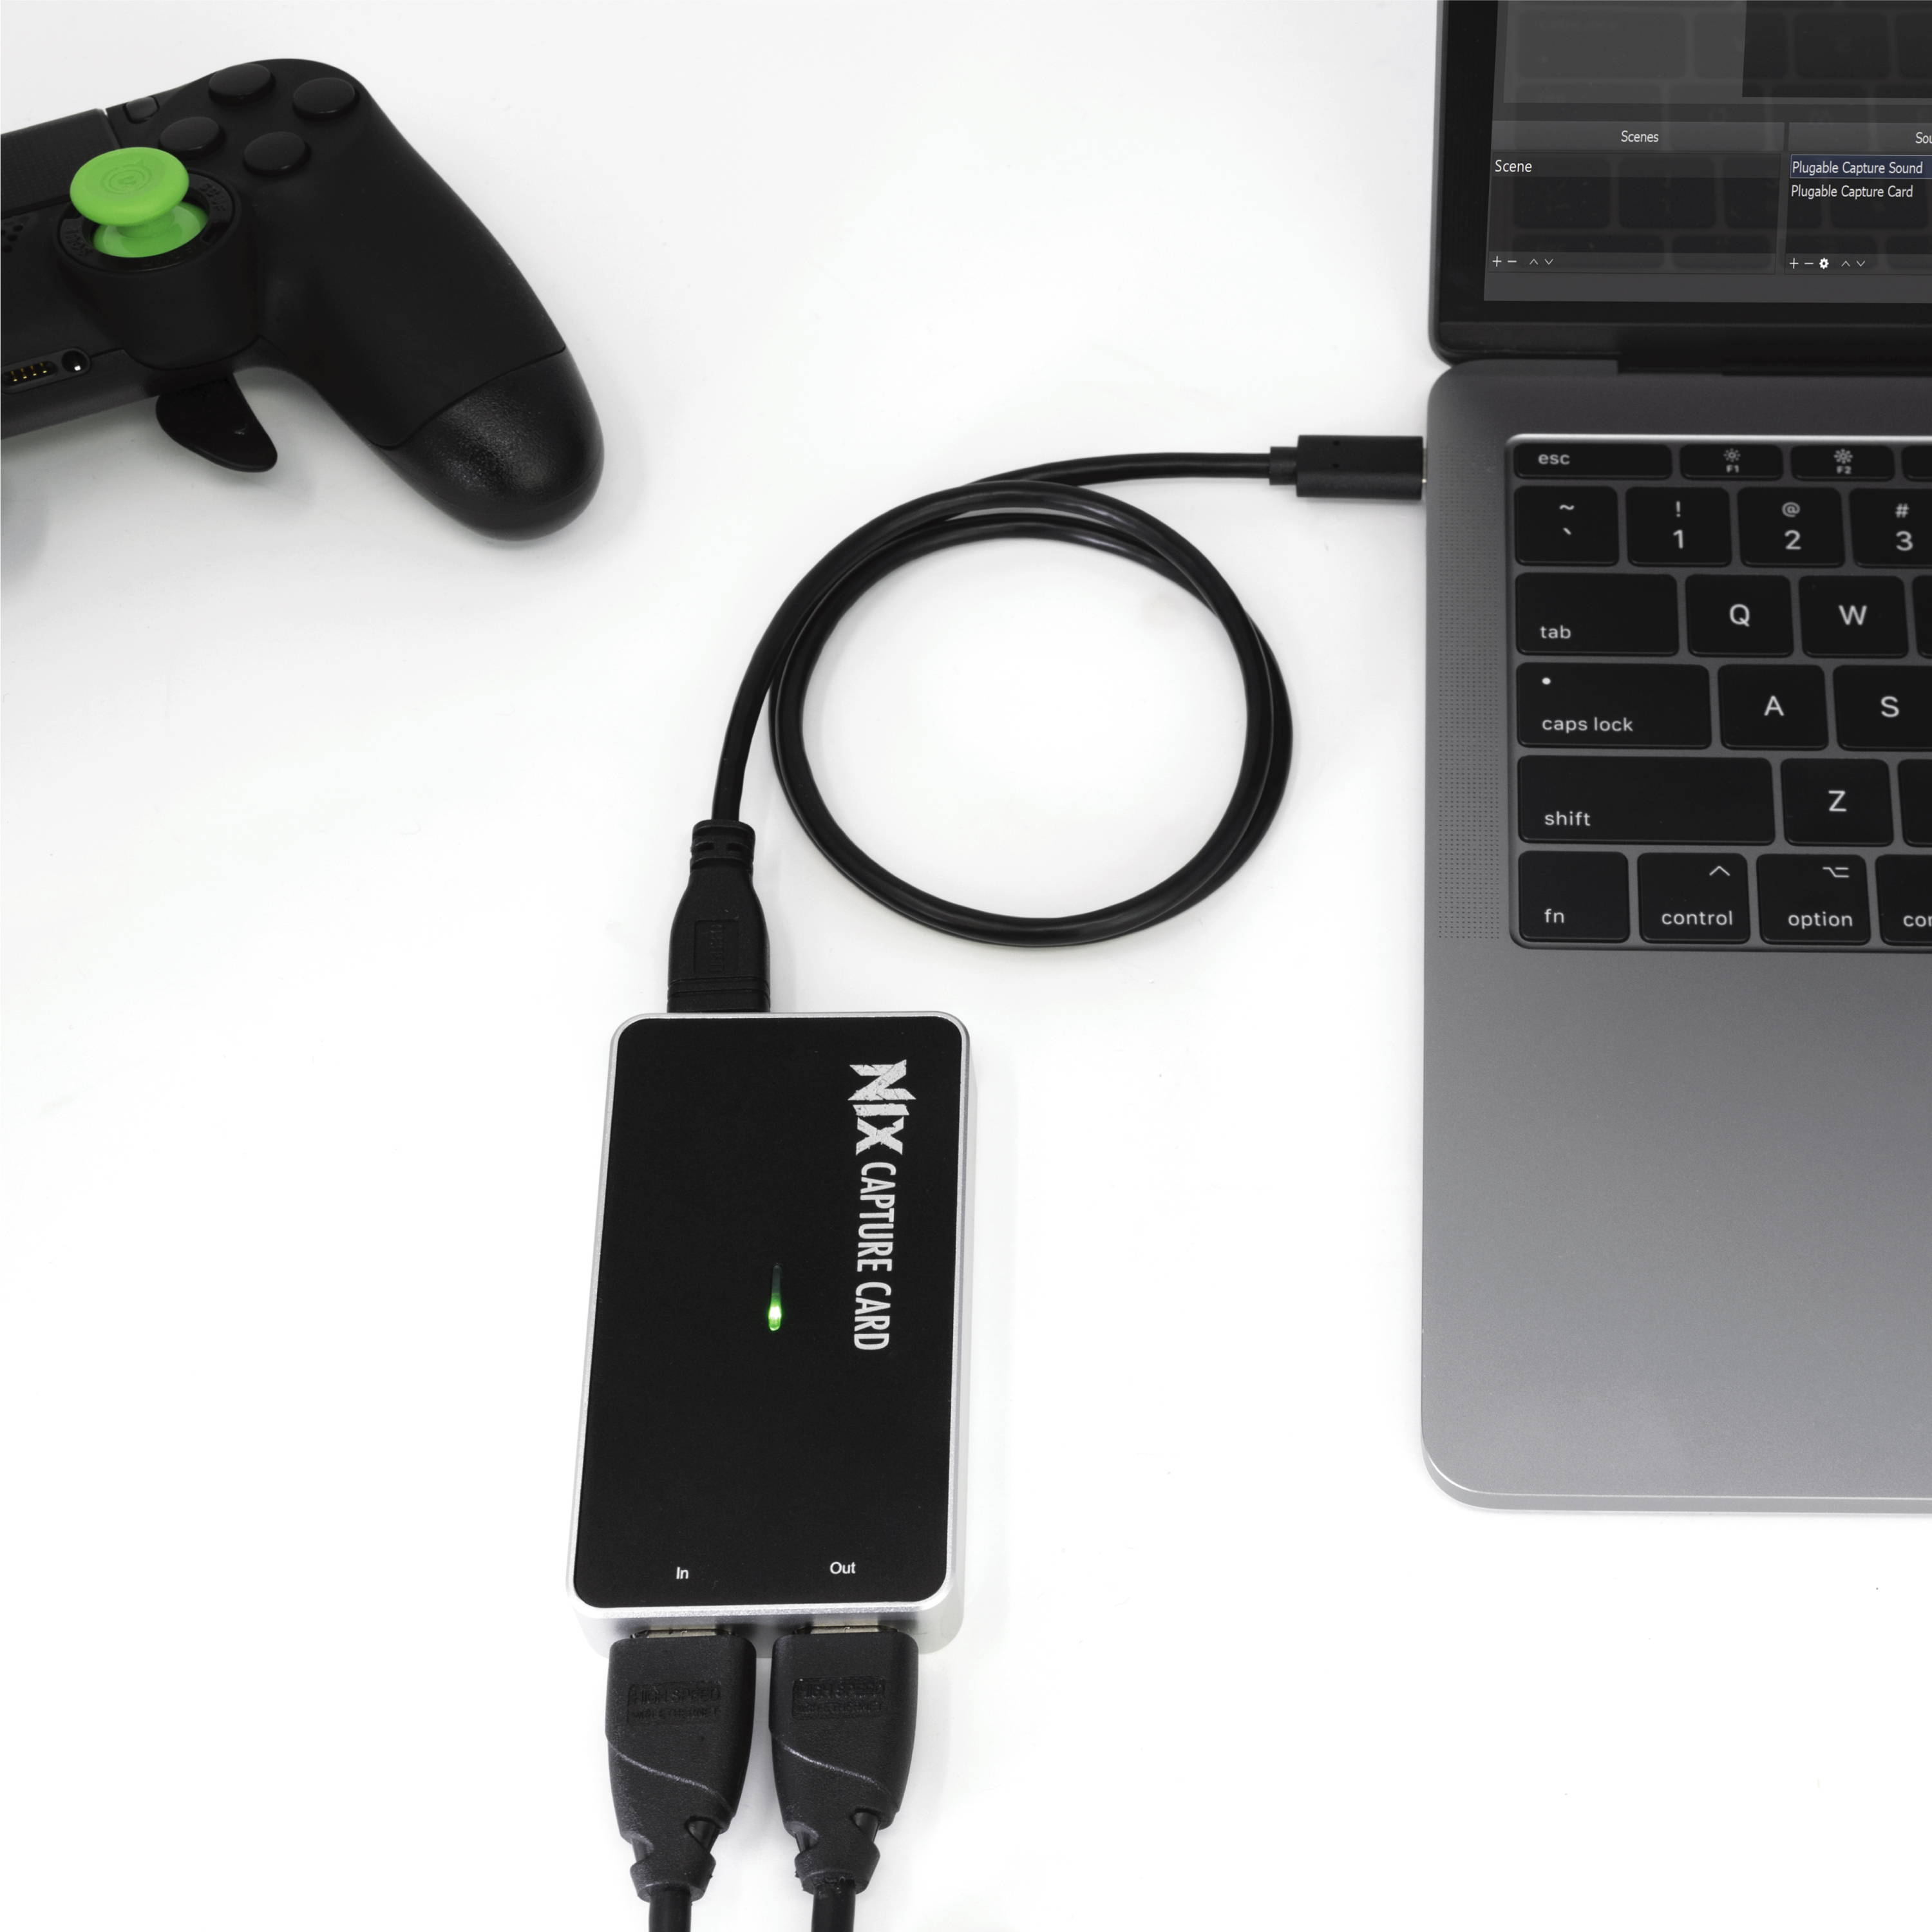 NIX Capture Card connect to Mac system